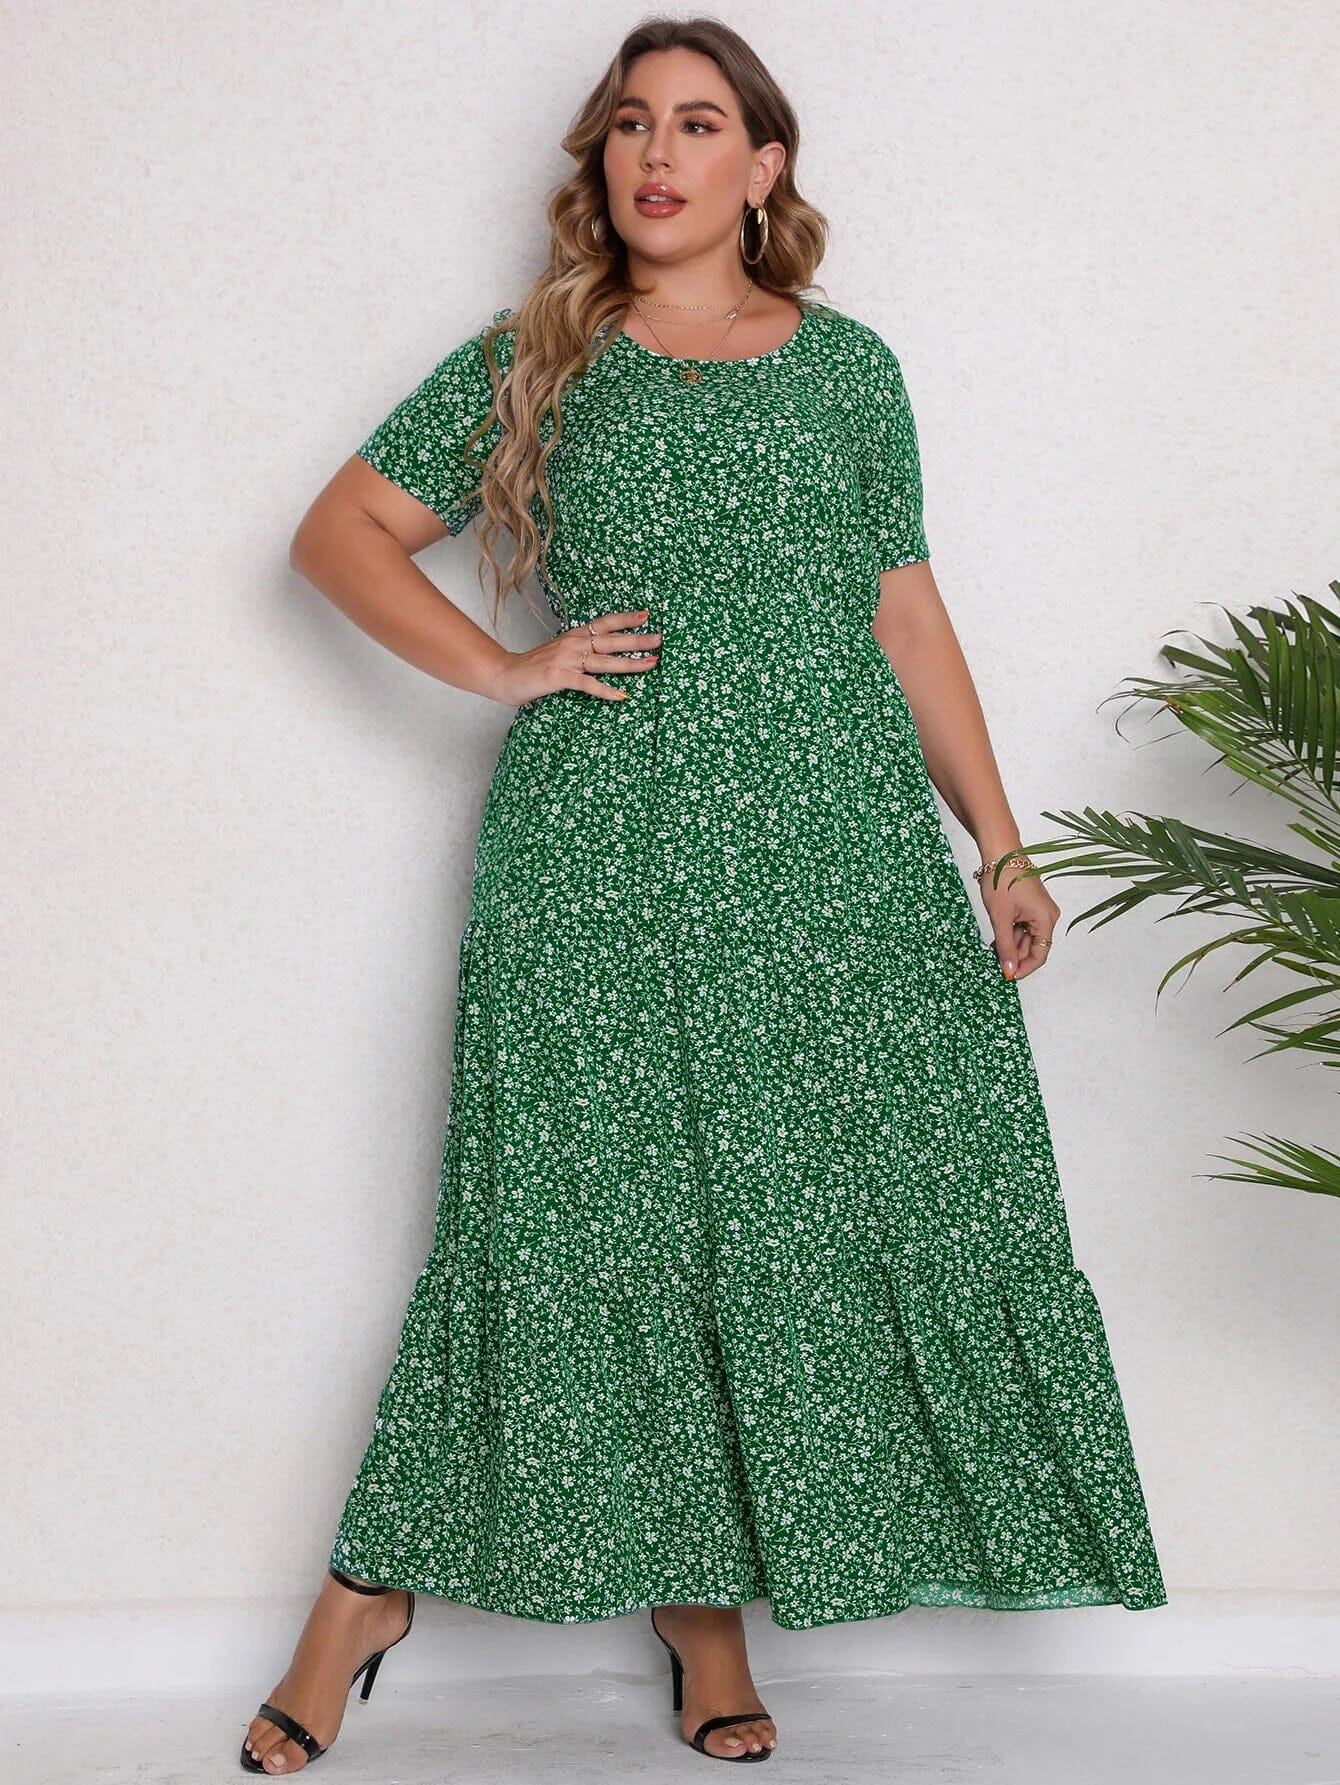 Women Plus Size Casual Flowy Holiday Beach Loose Short Sleeve Ditsy Printed Dress Dresses jehouze Green XL 